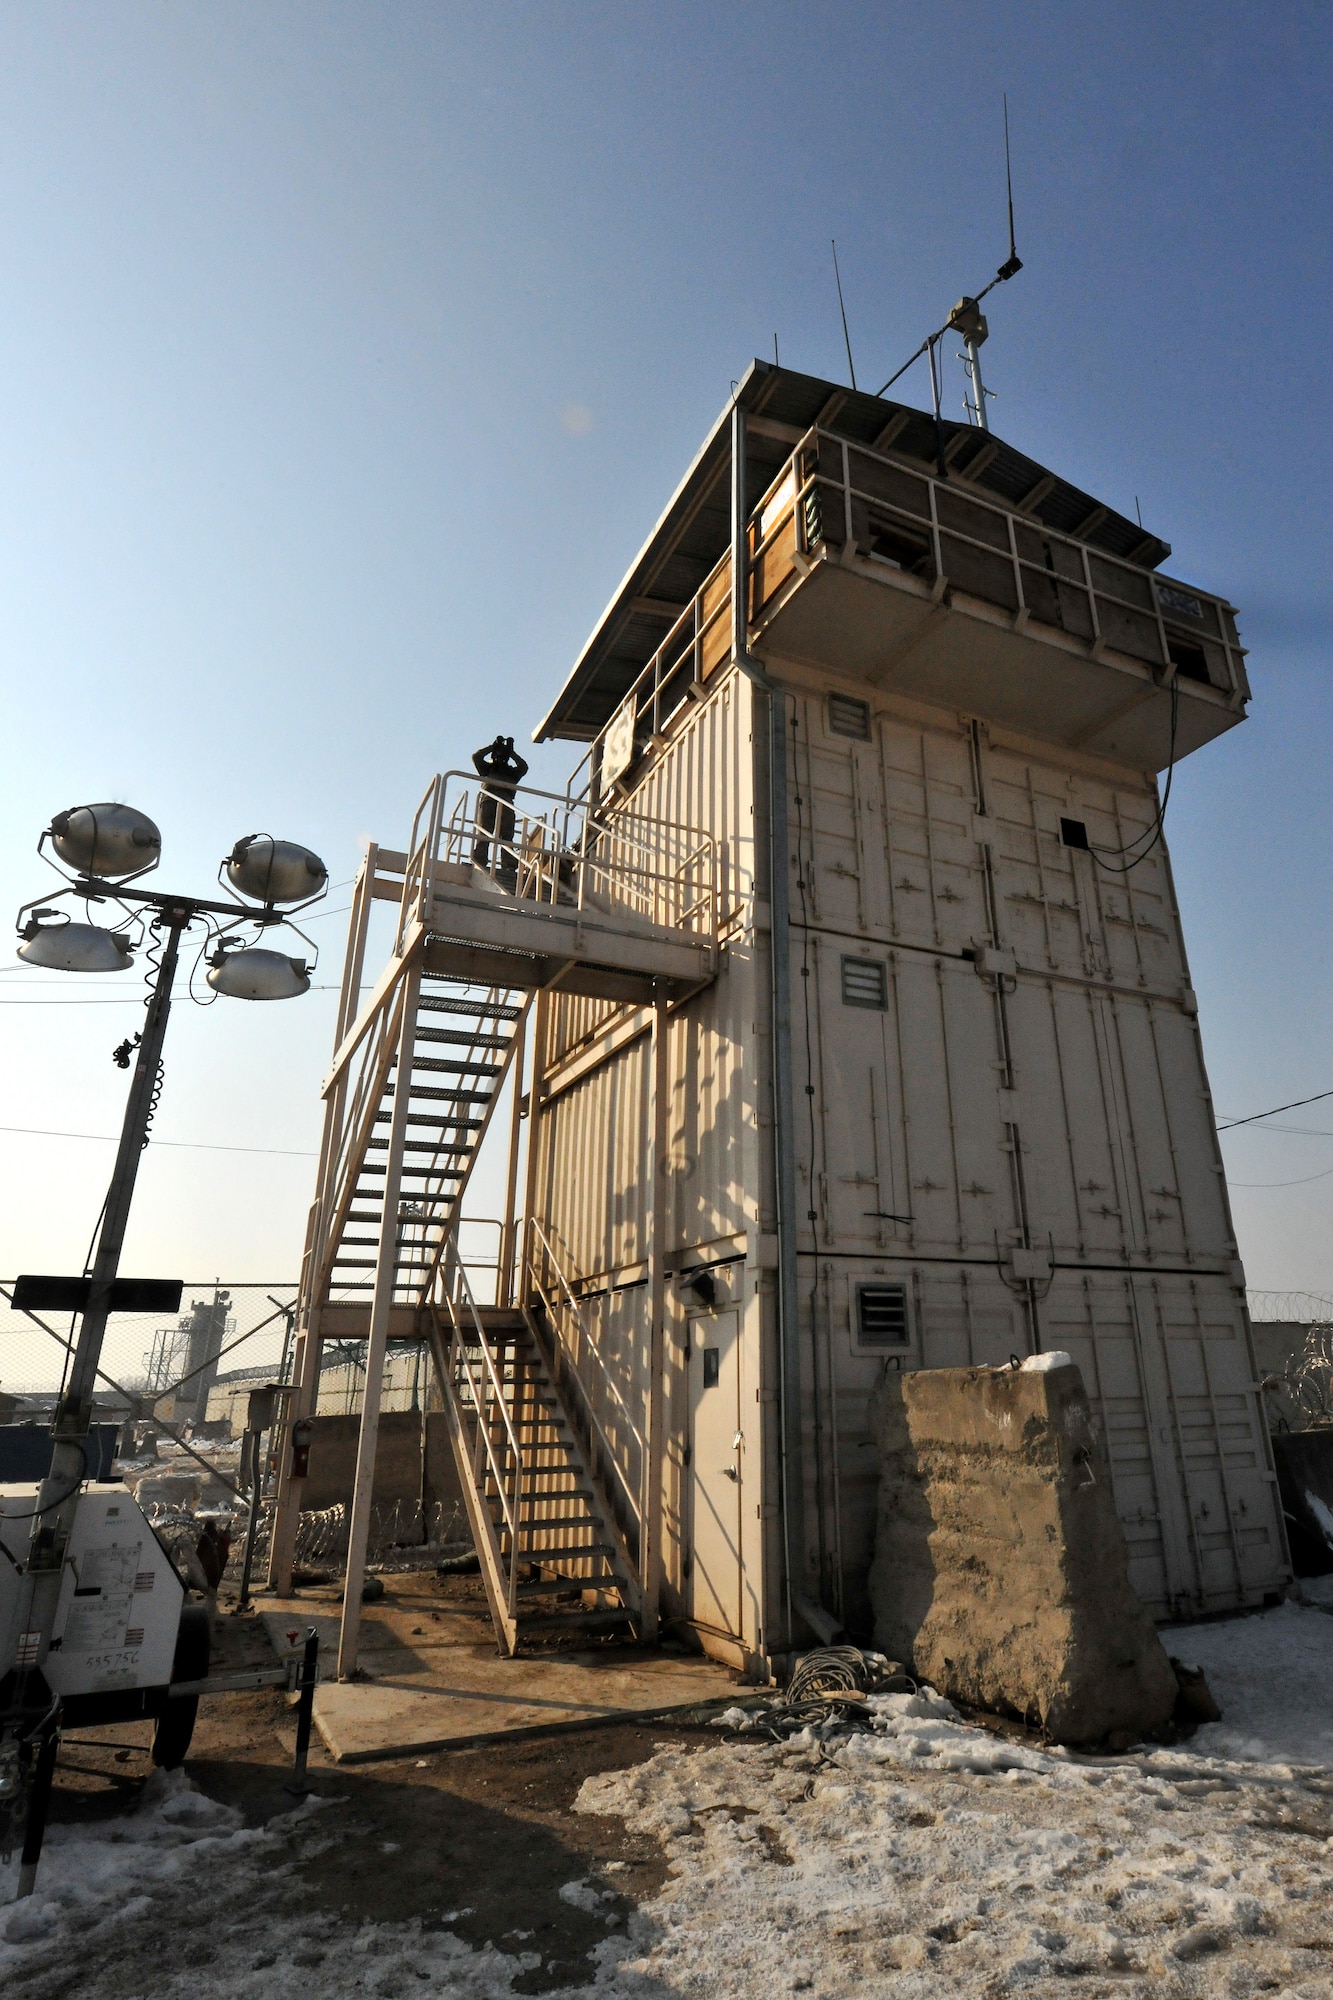 Staff Sgt. Richard Bruin, 455th Expeditionary Security Forces Squadron area supervisor, scans the perimeter around his guard tower on Bagram Airfield, Afghanistan, Jan. 10, 2013. The 455th ESFS man the multiple guard towers that ring the base, armed with powerful binoculars and other hi-tech surveillance gear, looking out into the local community and watching for any threats.  (U.S. Air Force photo/Senior Airman Chris Willis)